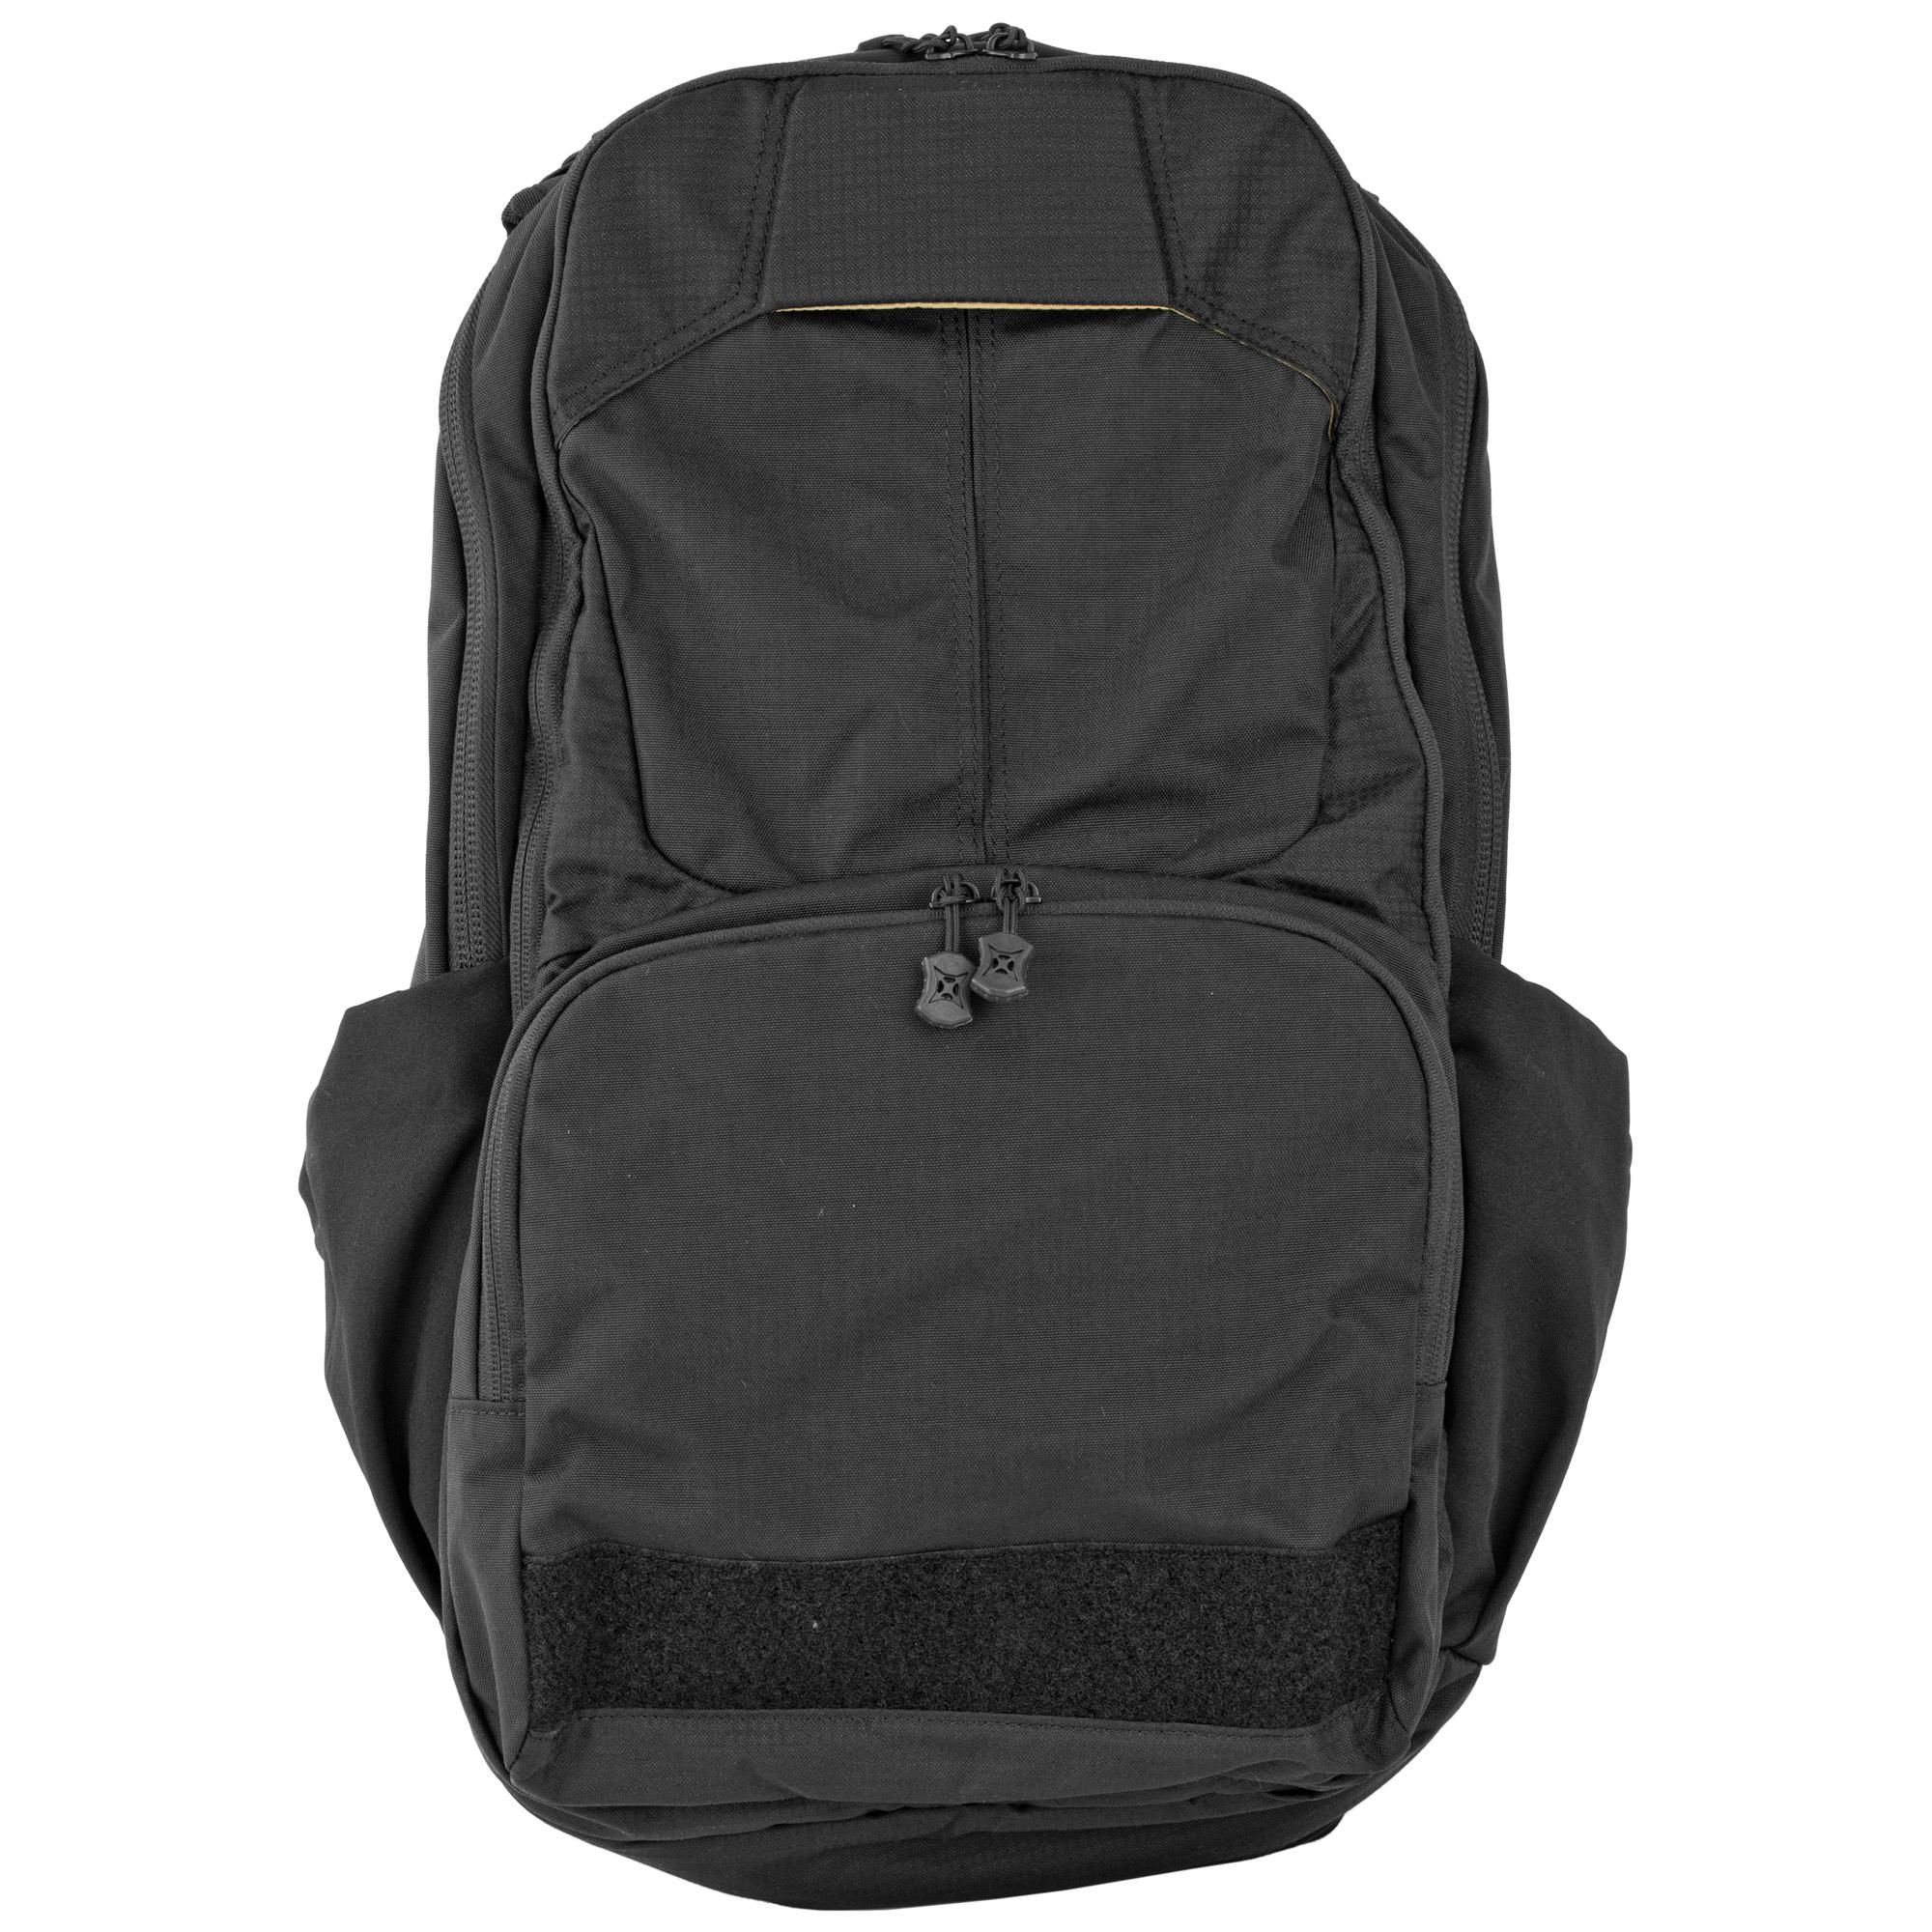 Ready Pack 2.0 Blk